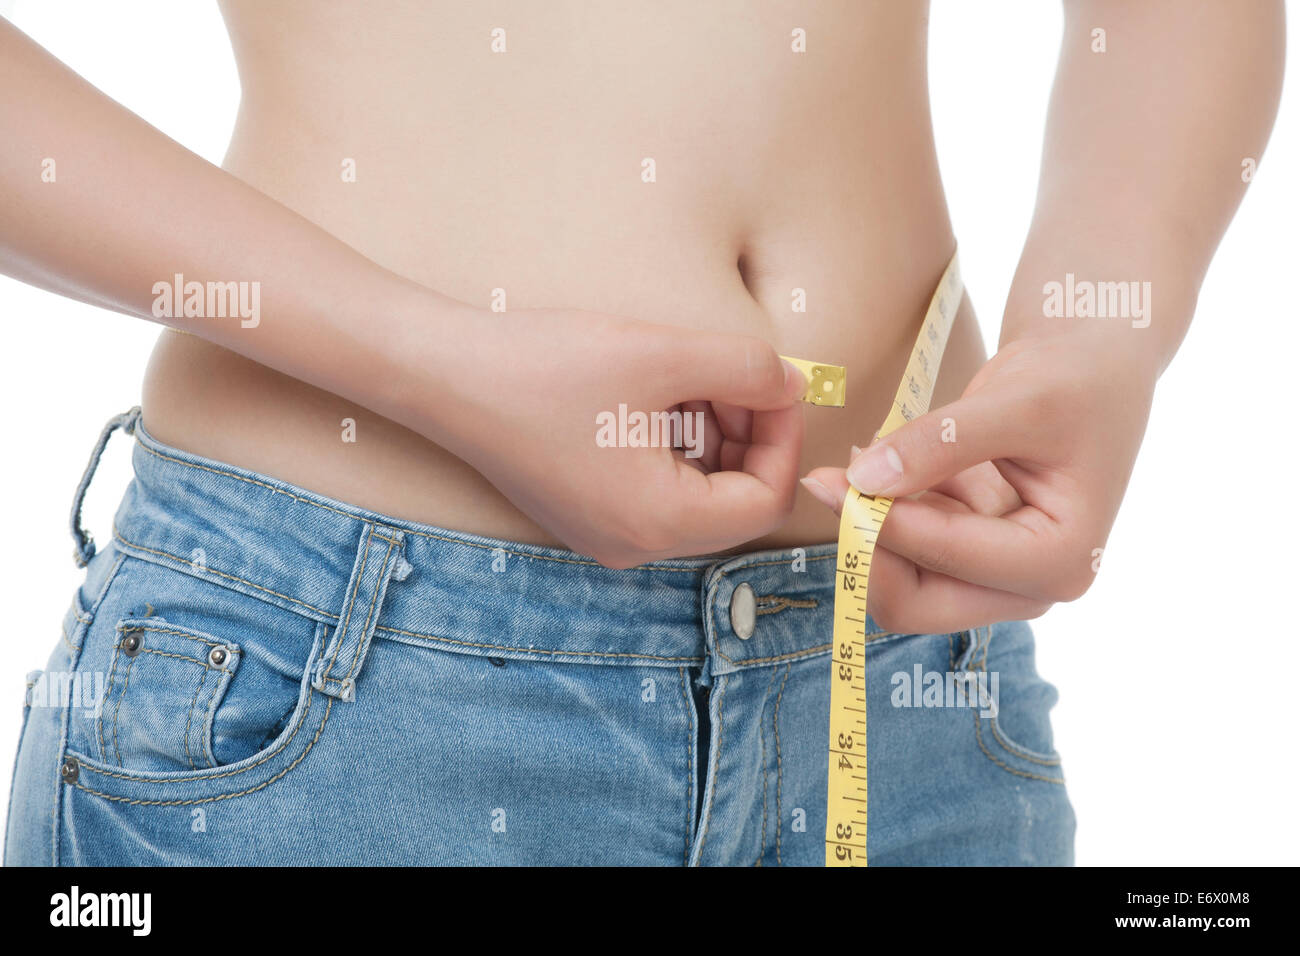 A very fit Asian woman measuring her waist isolated on a white background Stock Photo